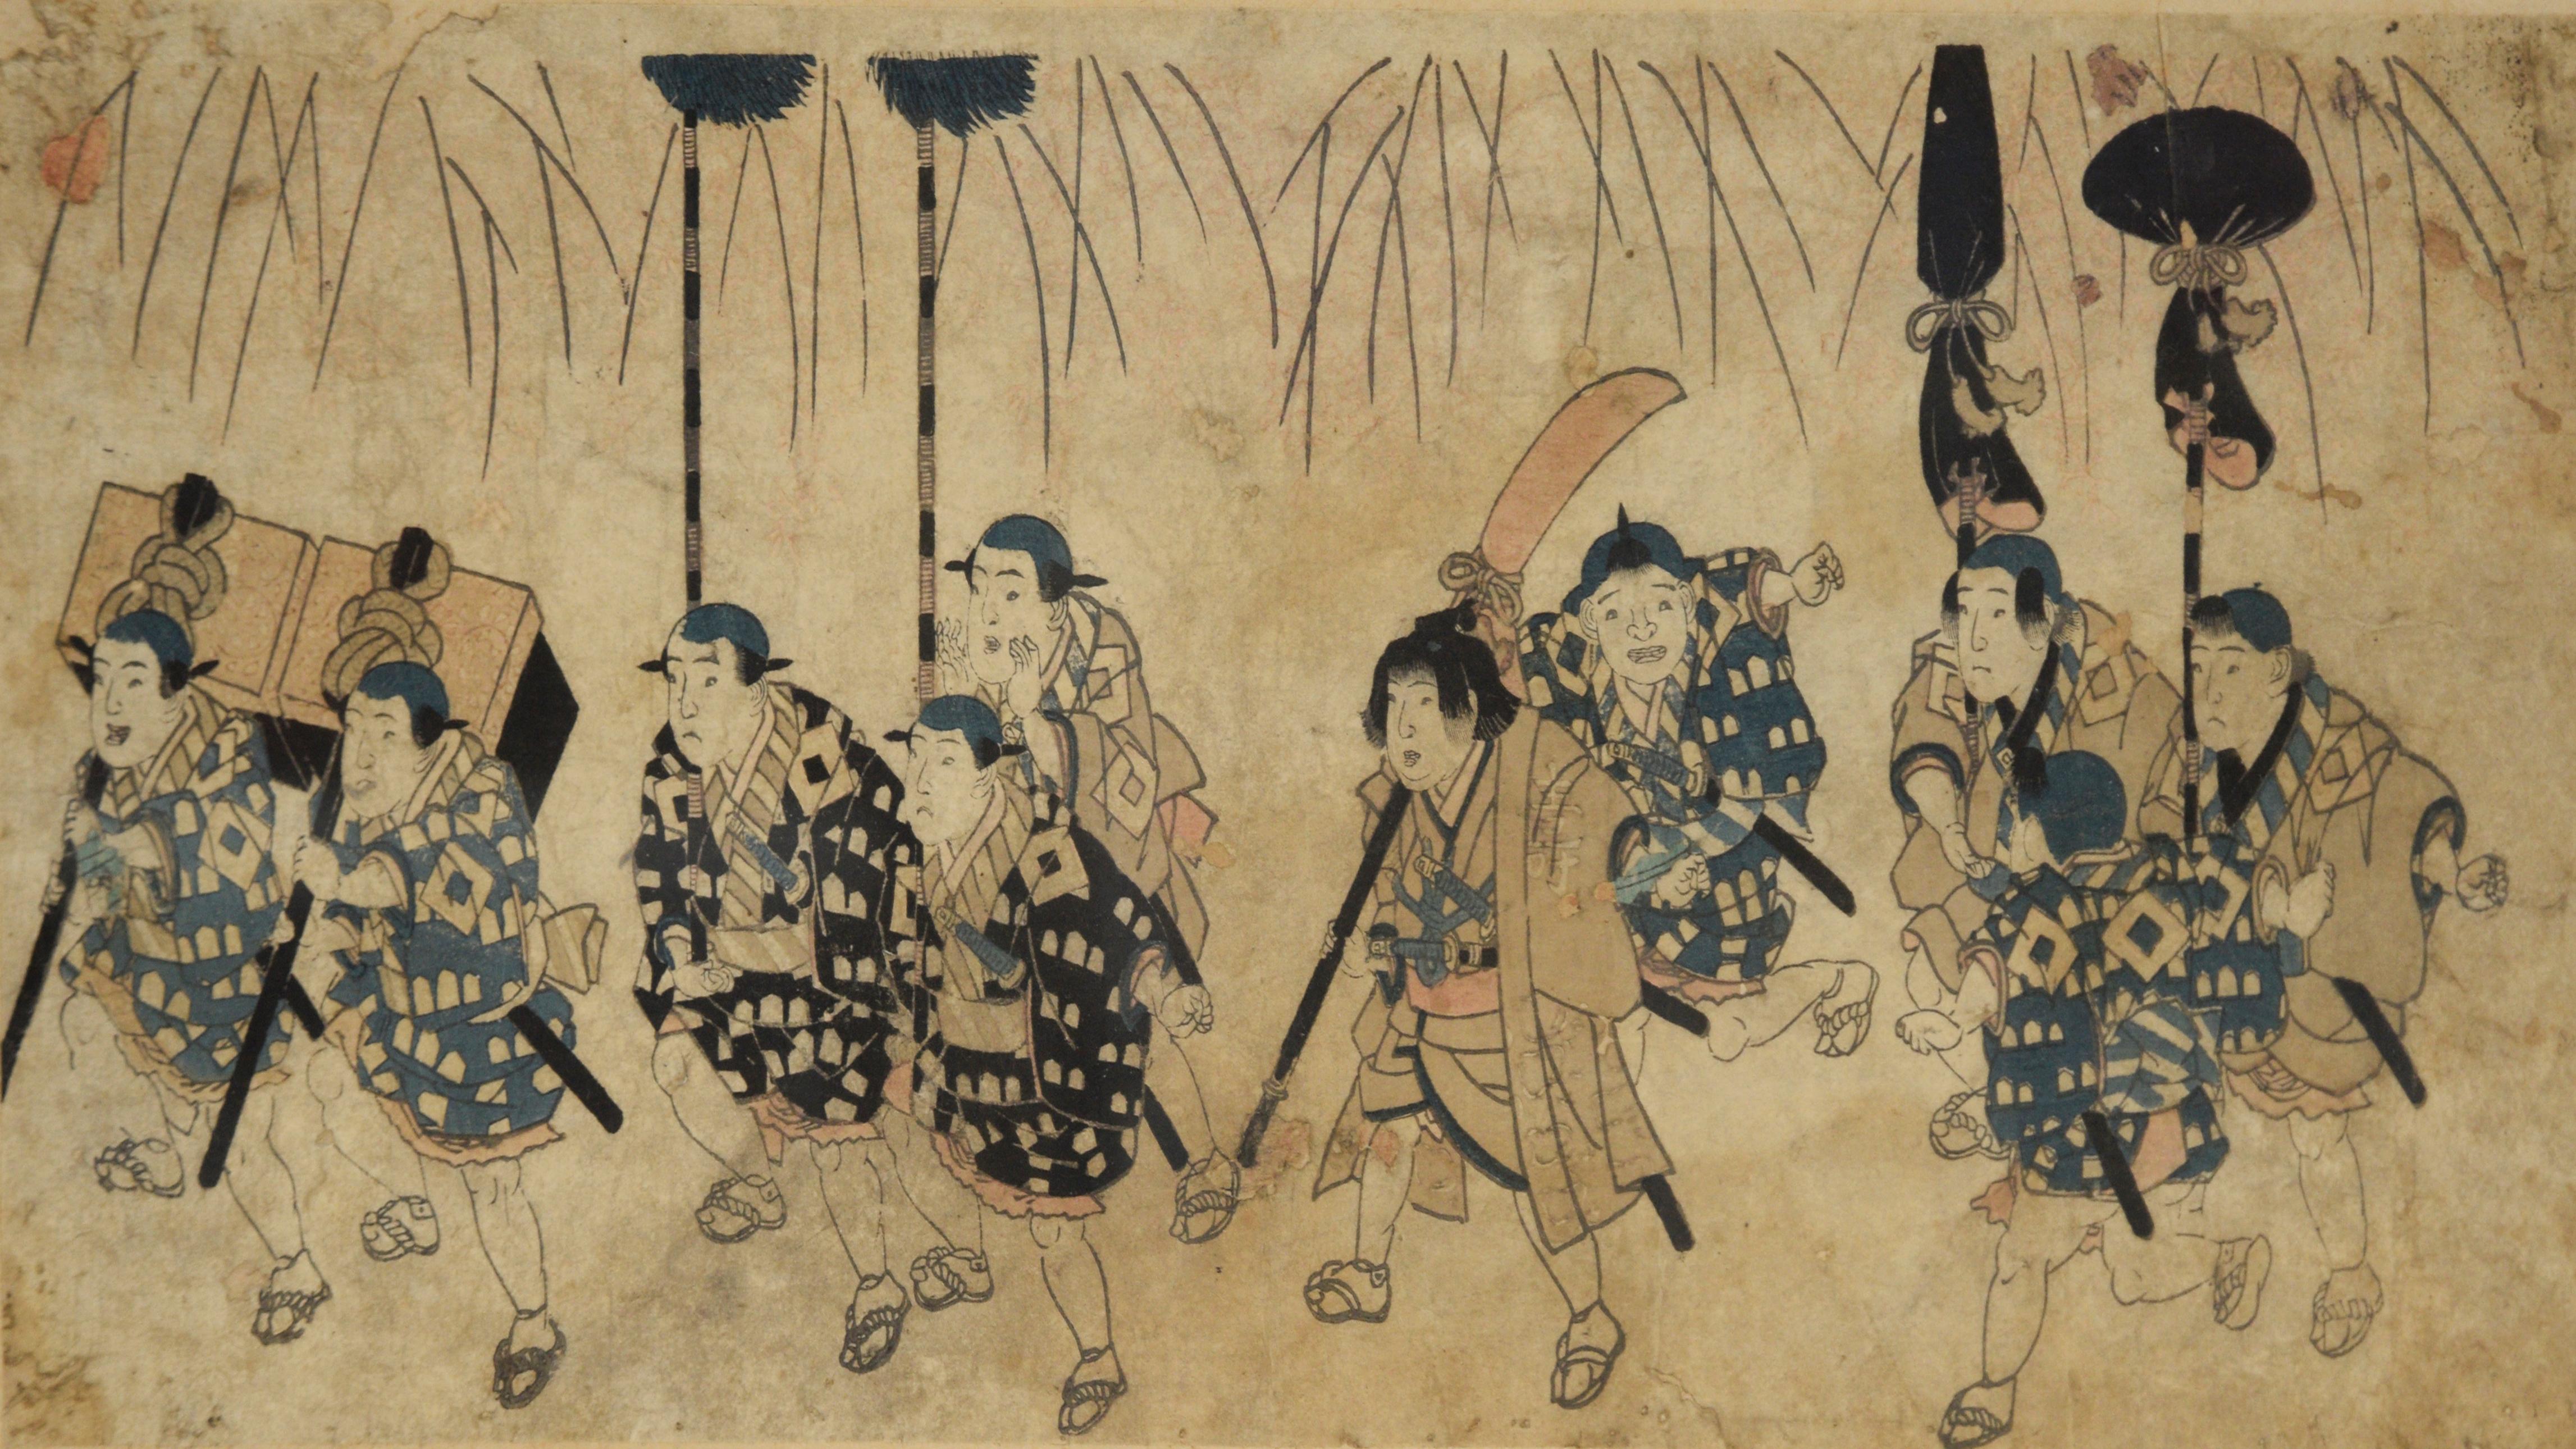 Procession Of A Daimyo - Original Woodblock Print

Original woodblock print depicting the procession of a Daimyo. Ten Japanese soldiers are seen as they aid in transporting the Daimyo. Daimyo were powerful Japanese magnates, feudal lords who, from